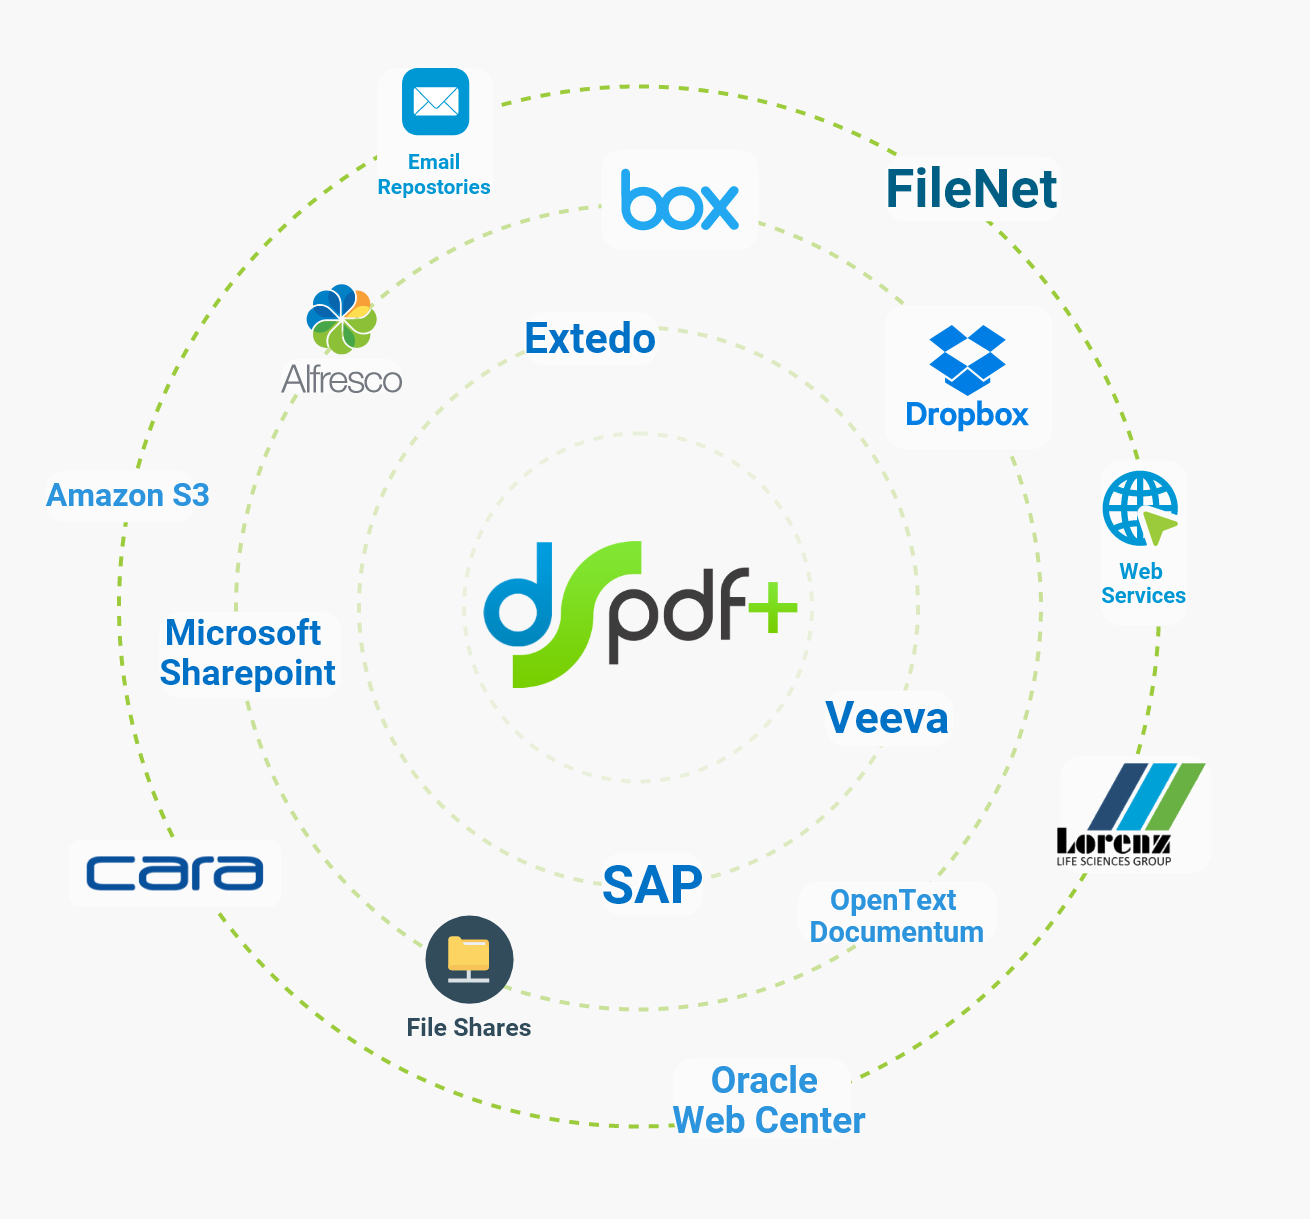 PDF+ is a powerful enterprise PDF conversion server and software that can connect with any enterprise document management system you have